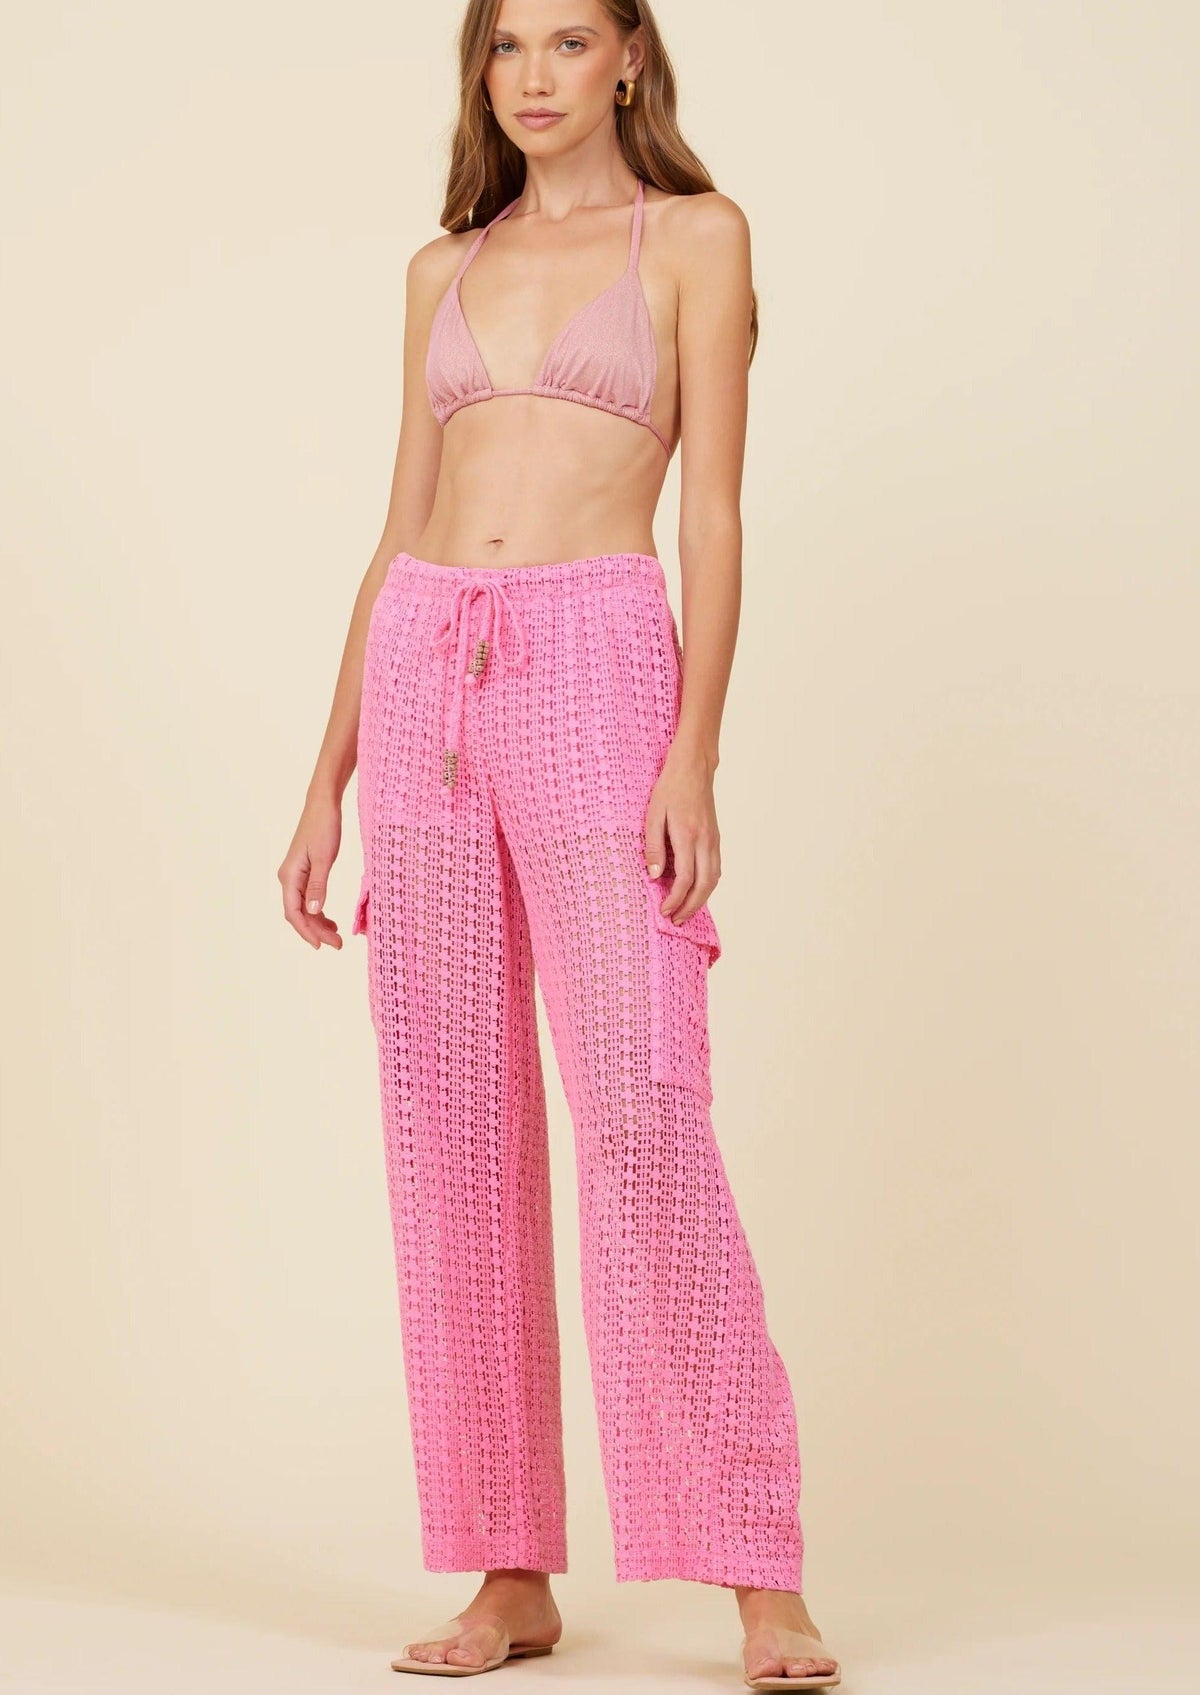 Surf Gypsy - Hot Pink Crochet Cargos - OutDazl